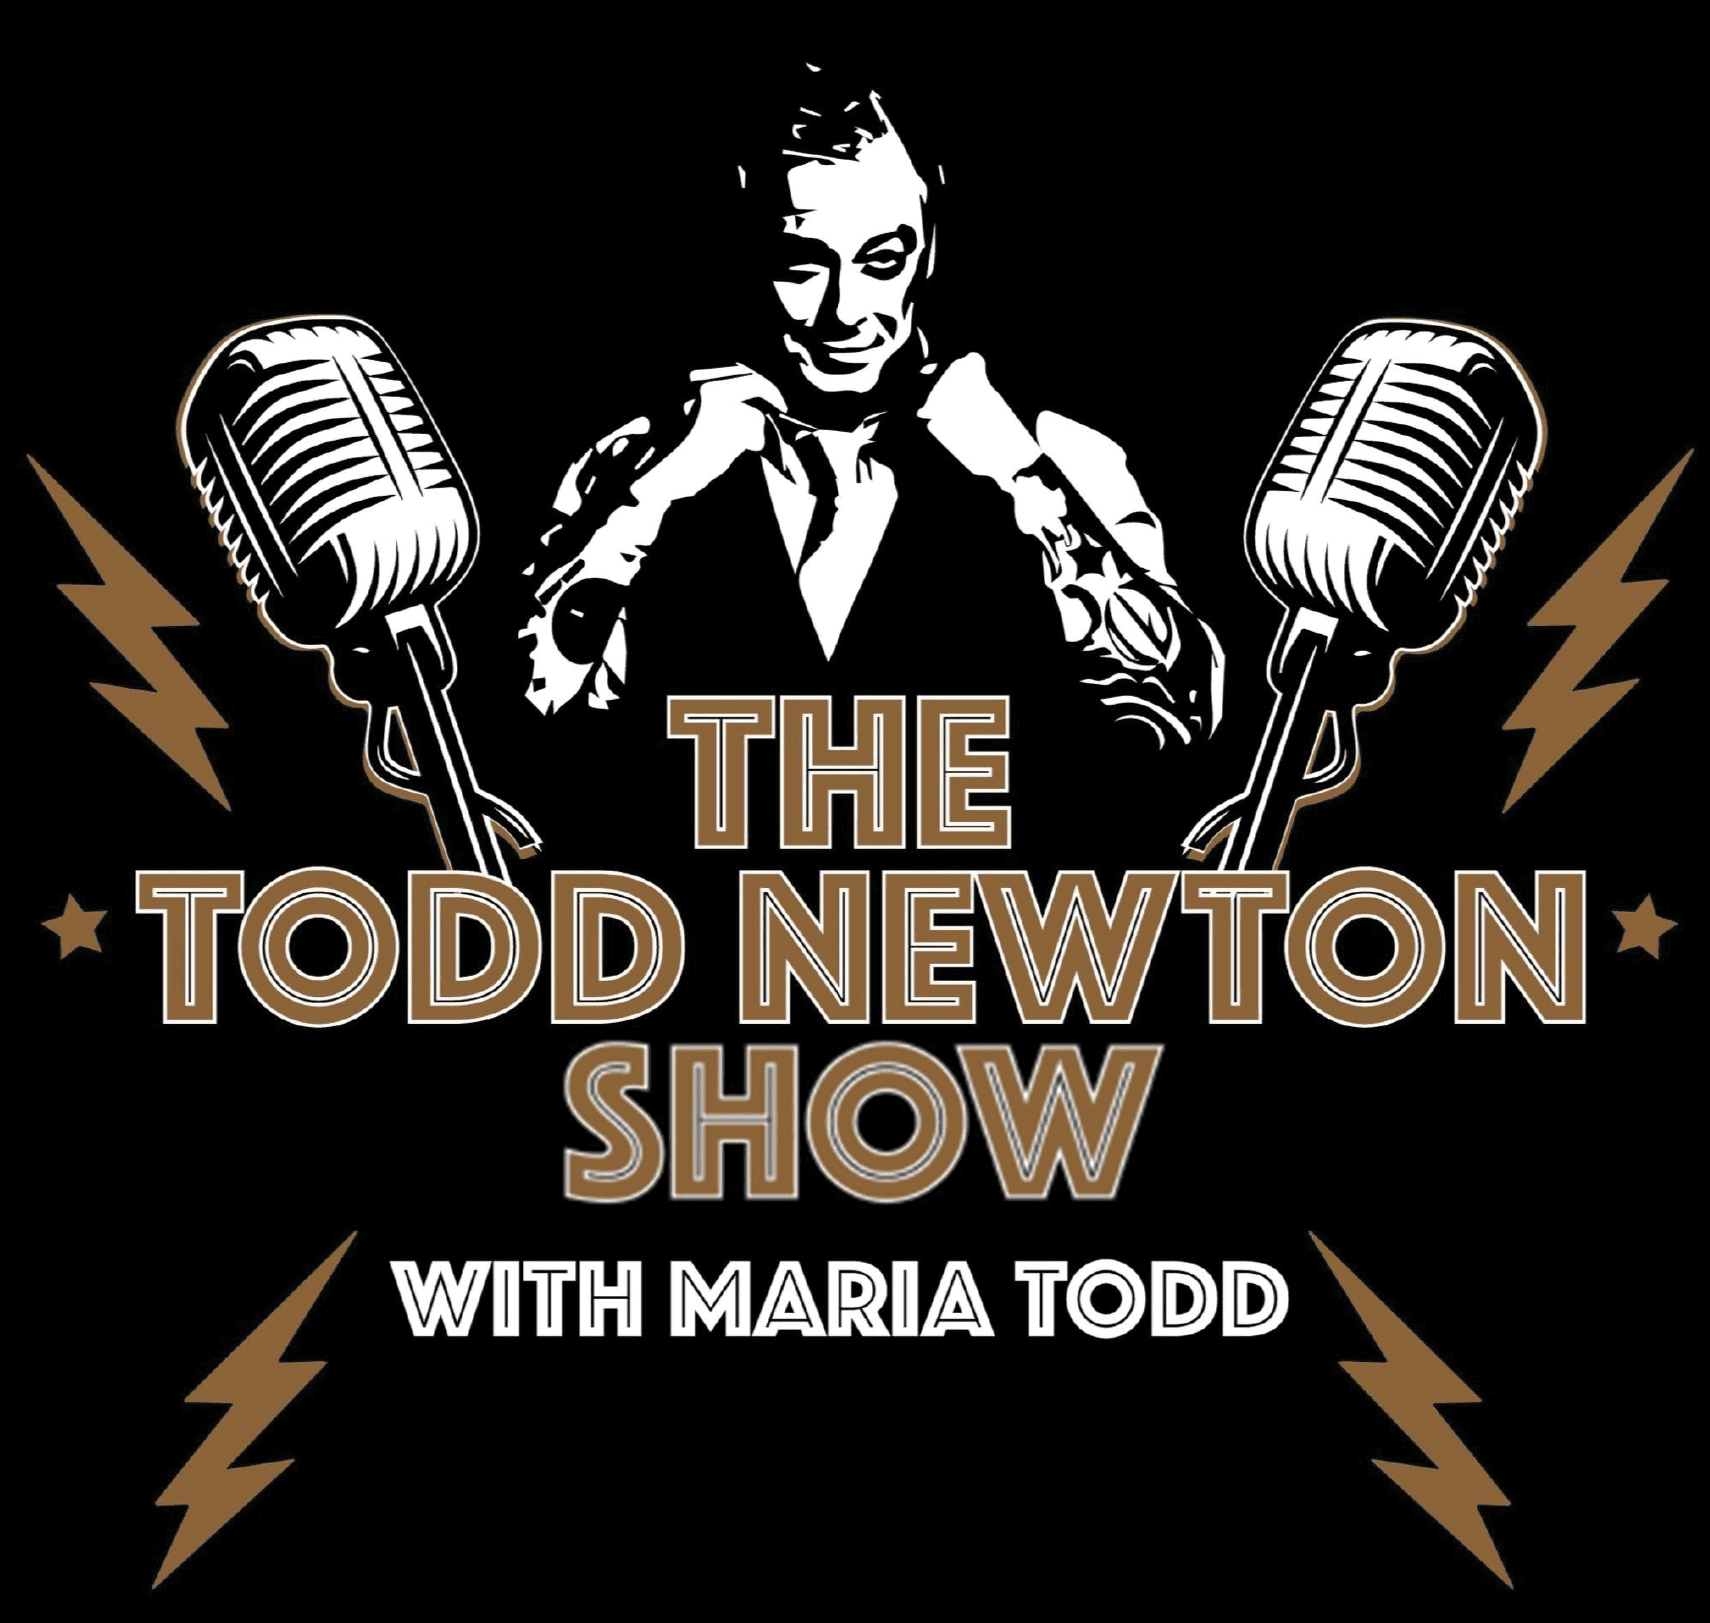 The Todd Newton Show With Maria Todd | Country 105.1 The Wolf (WJZM)